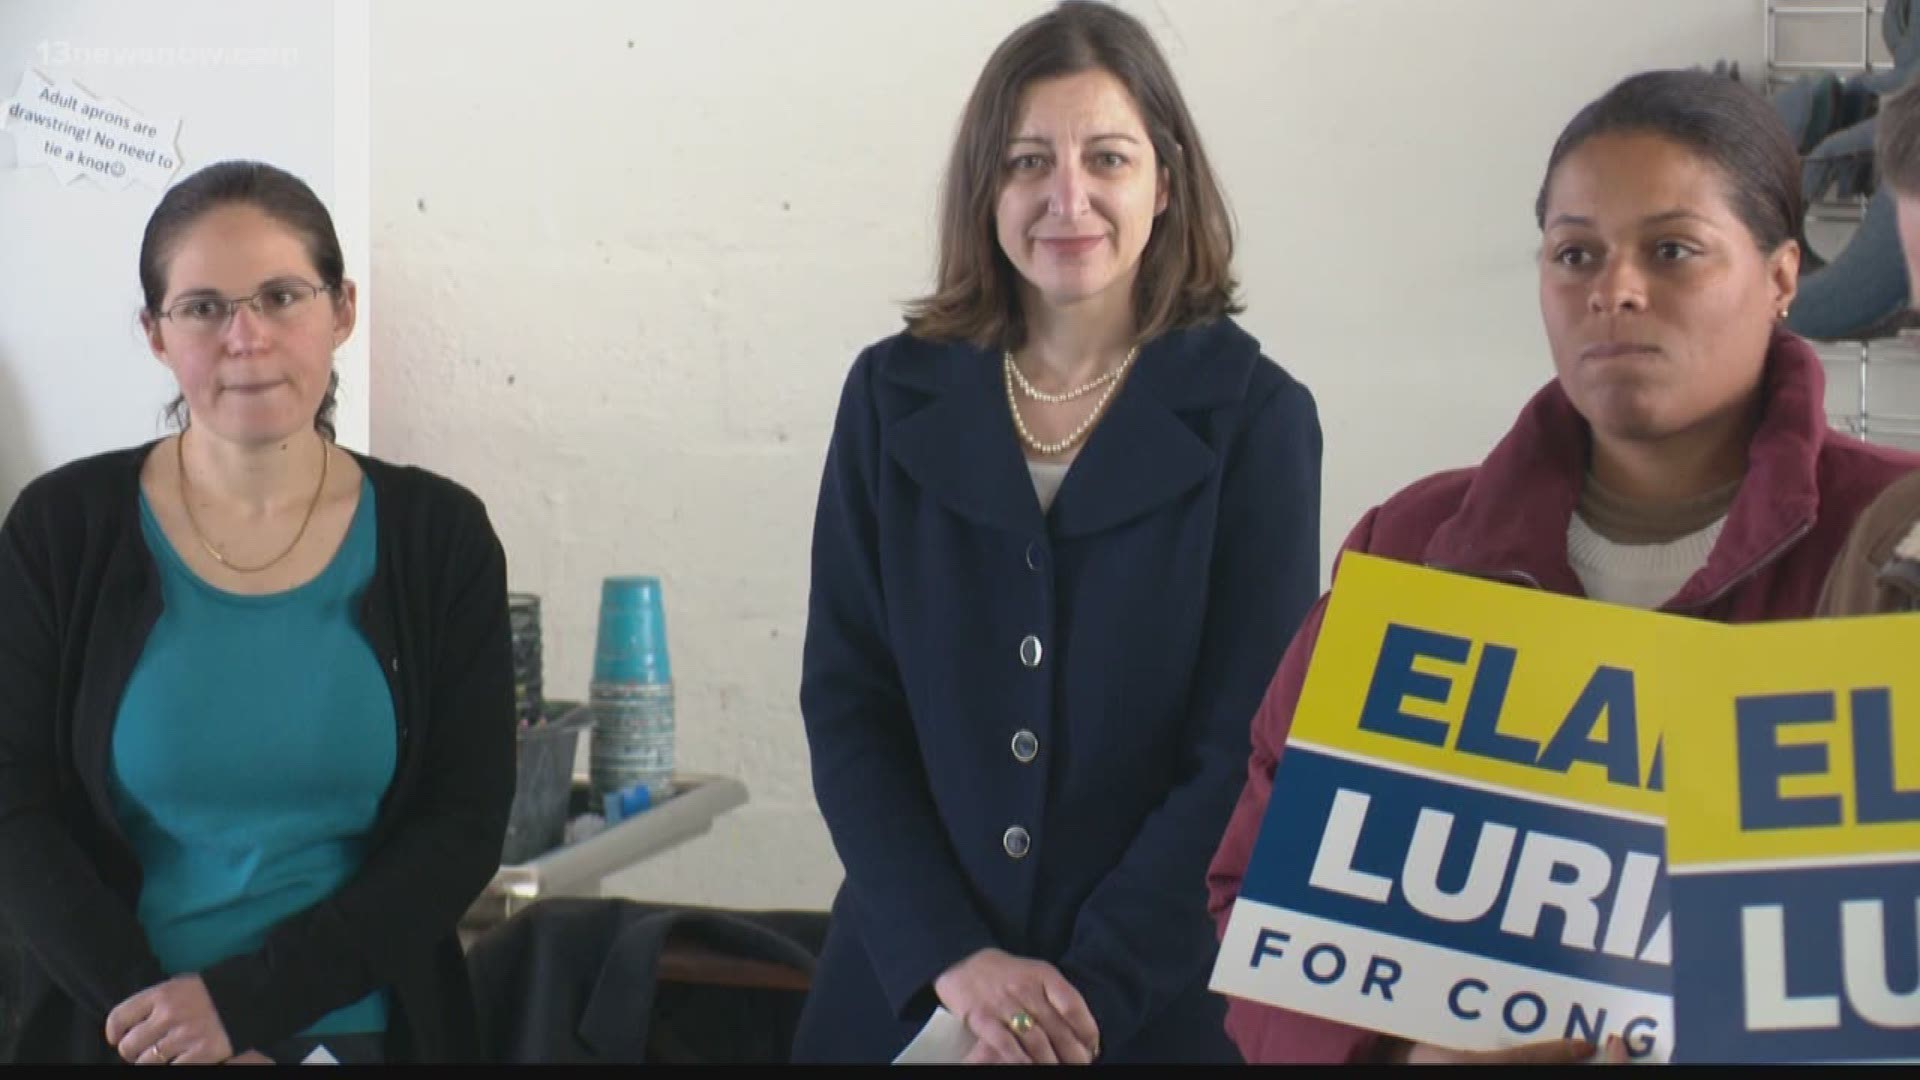 Elaine Luria, a retired Navy commander and small business owner, announced she would run to represent Virginia's Second Congressional District.